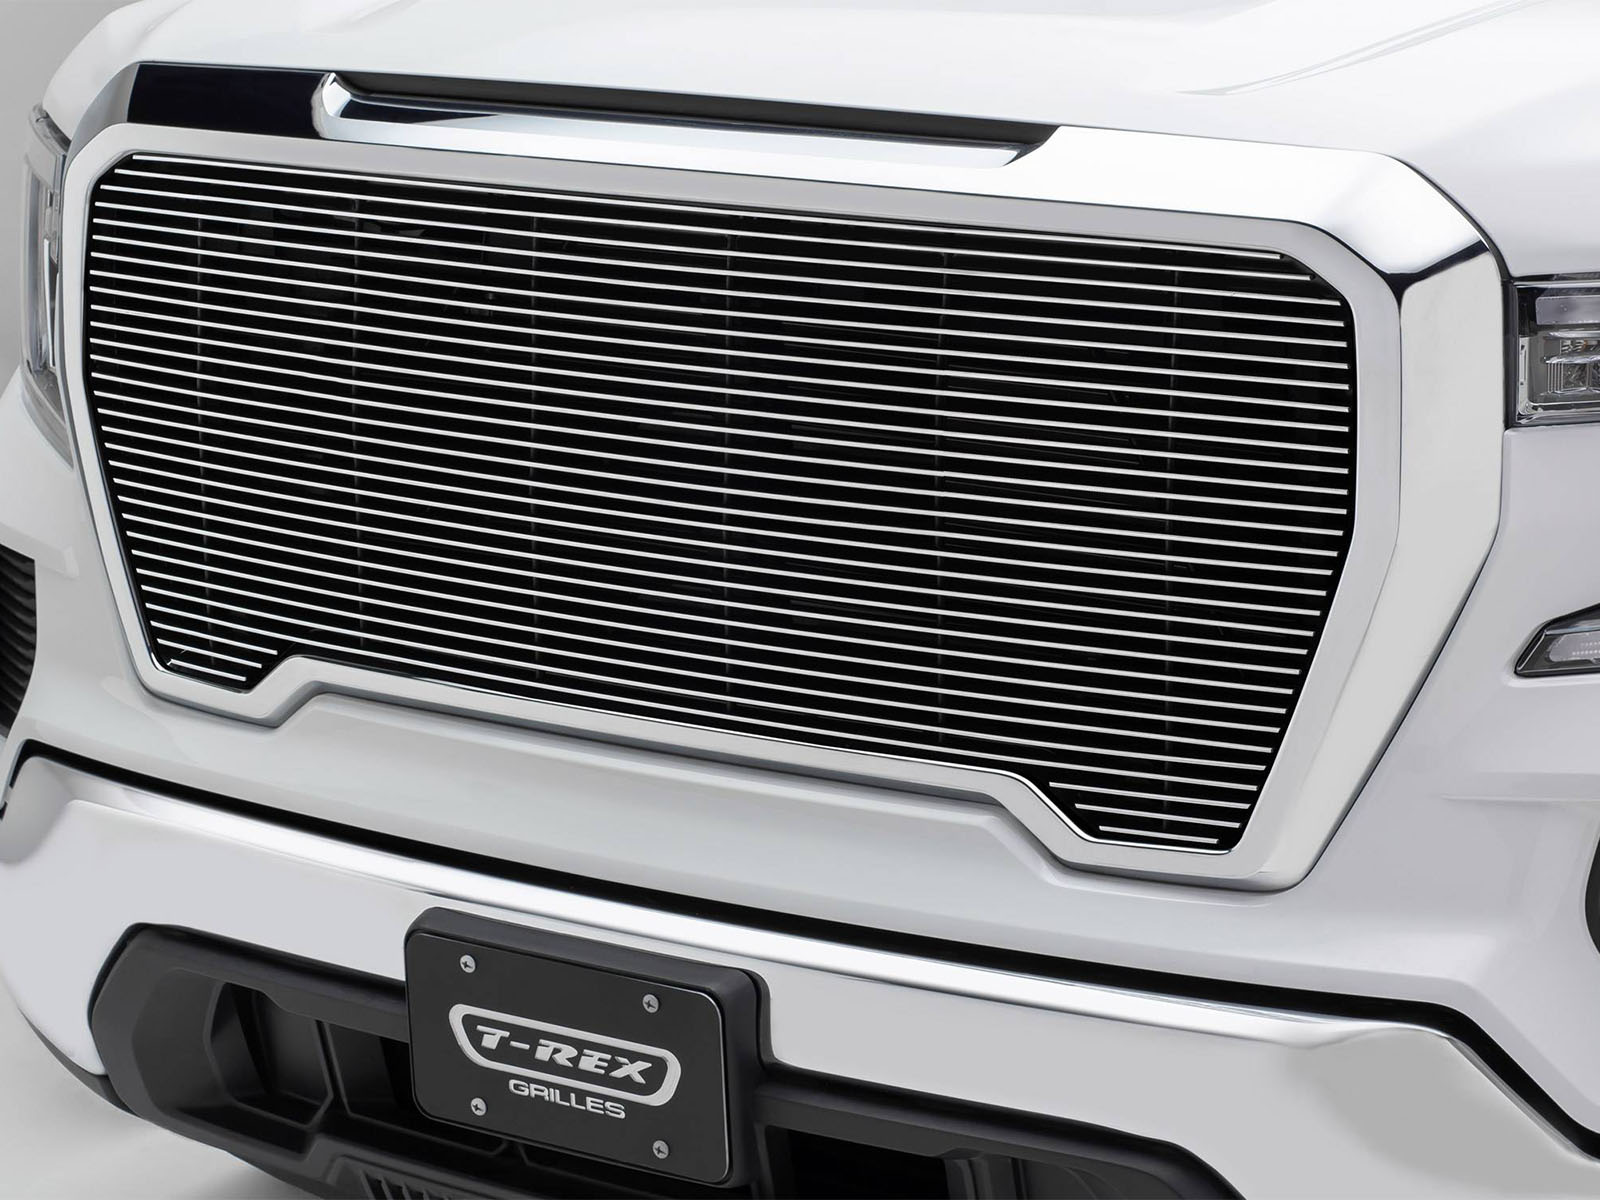 Ford Excursion Grilles | RealTruck